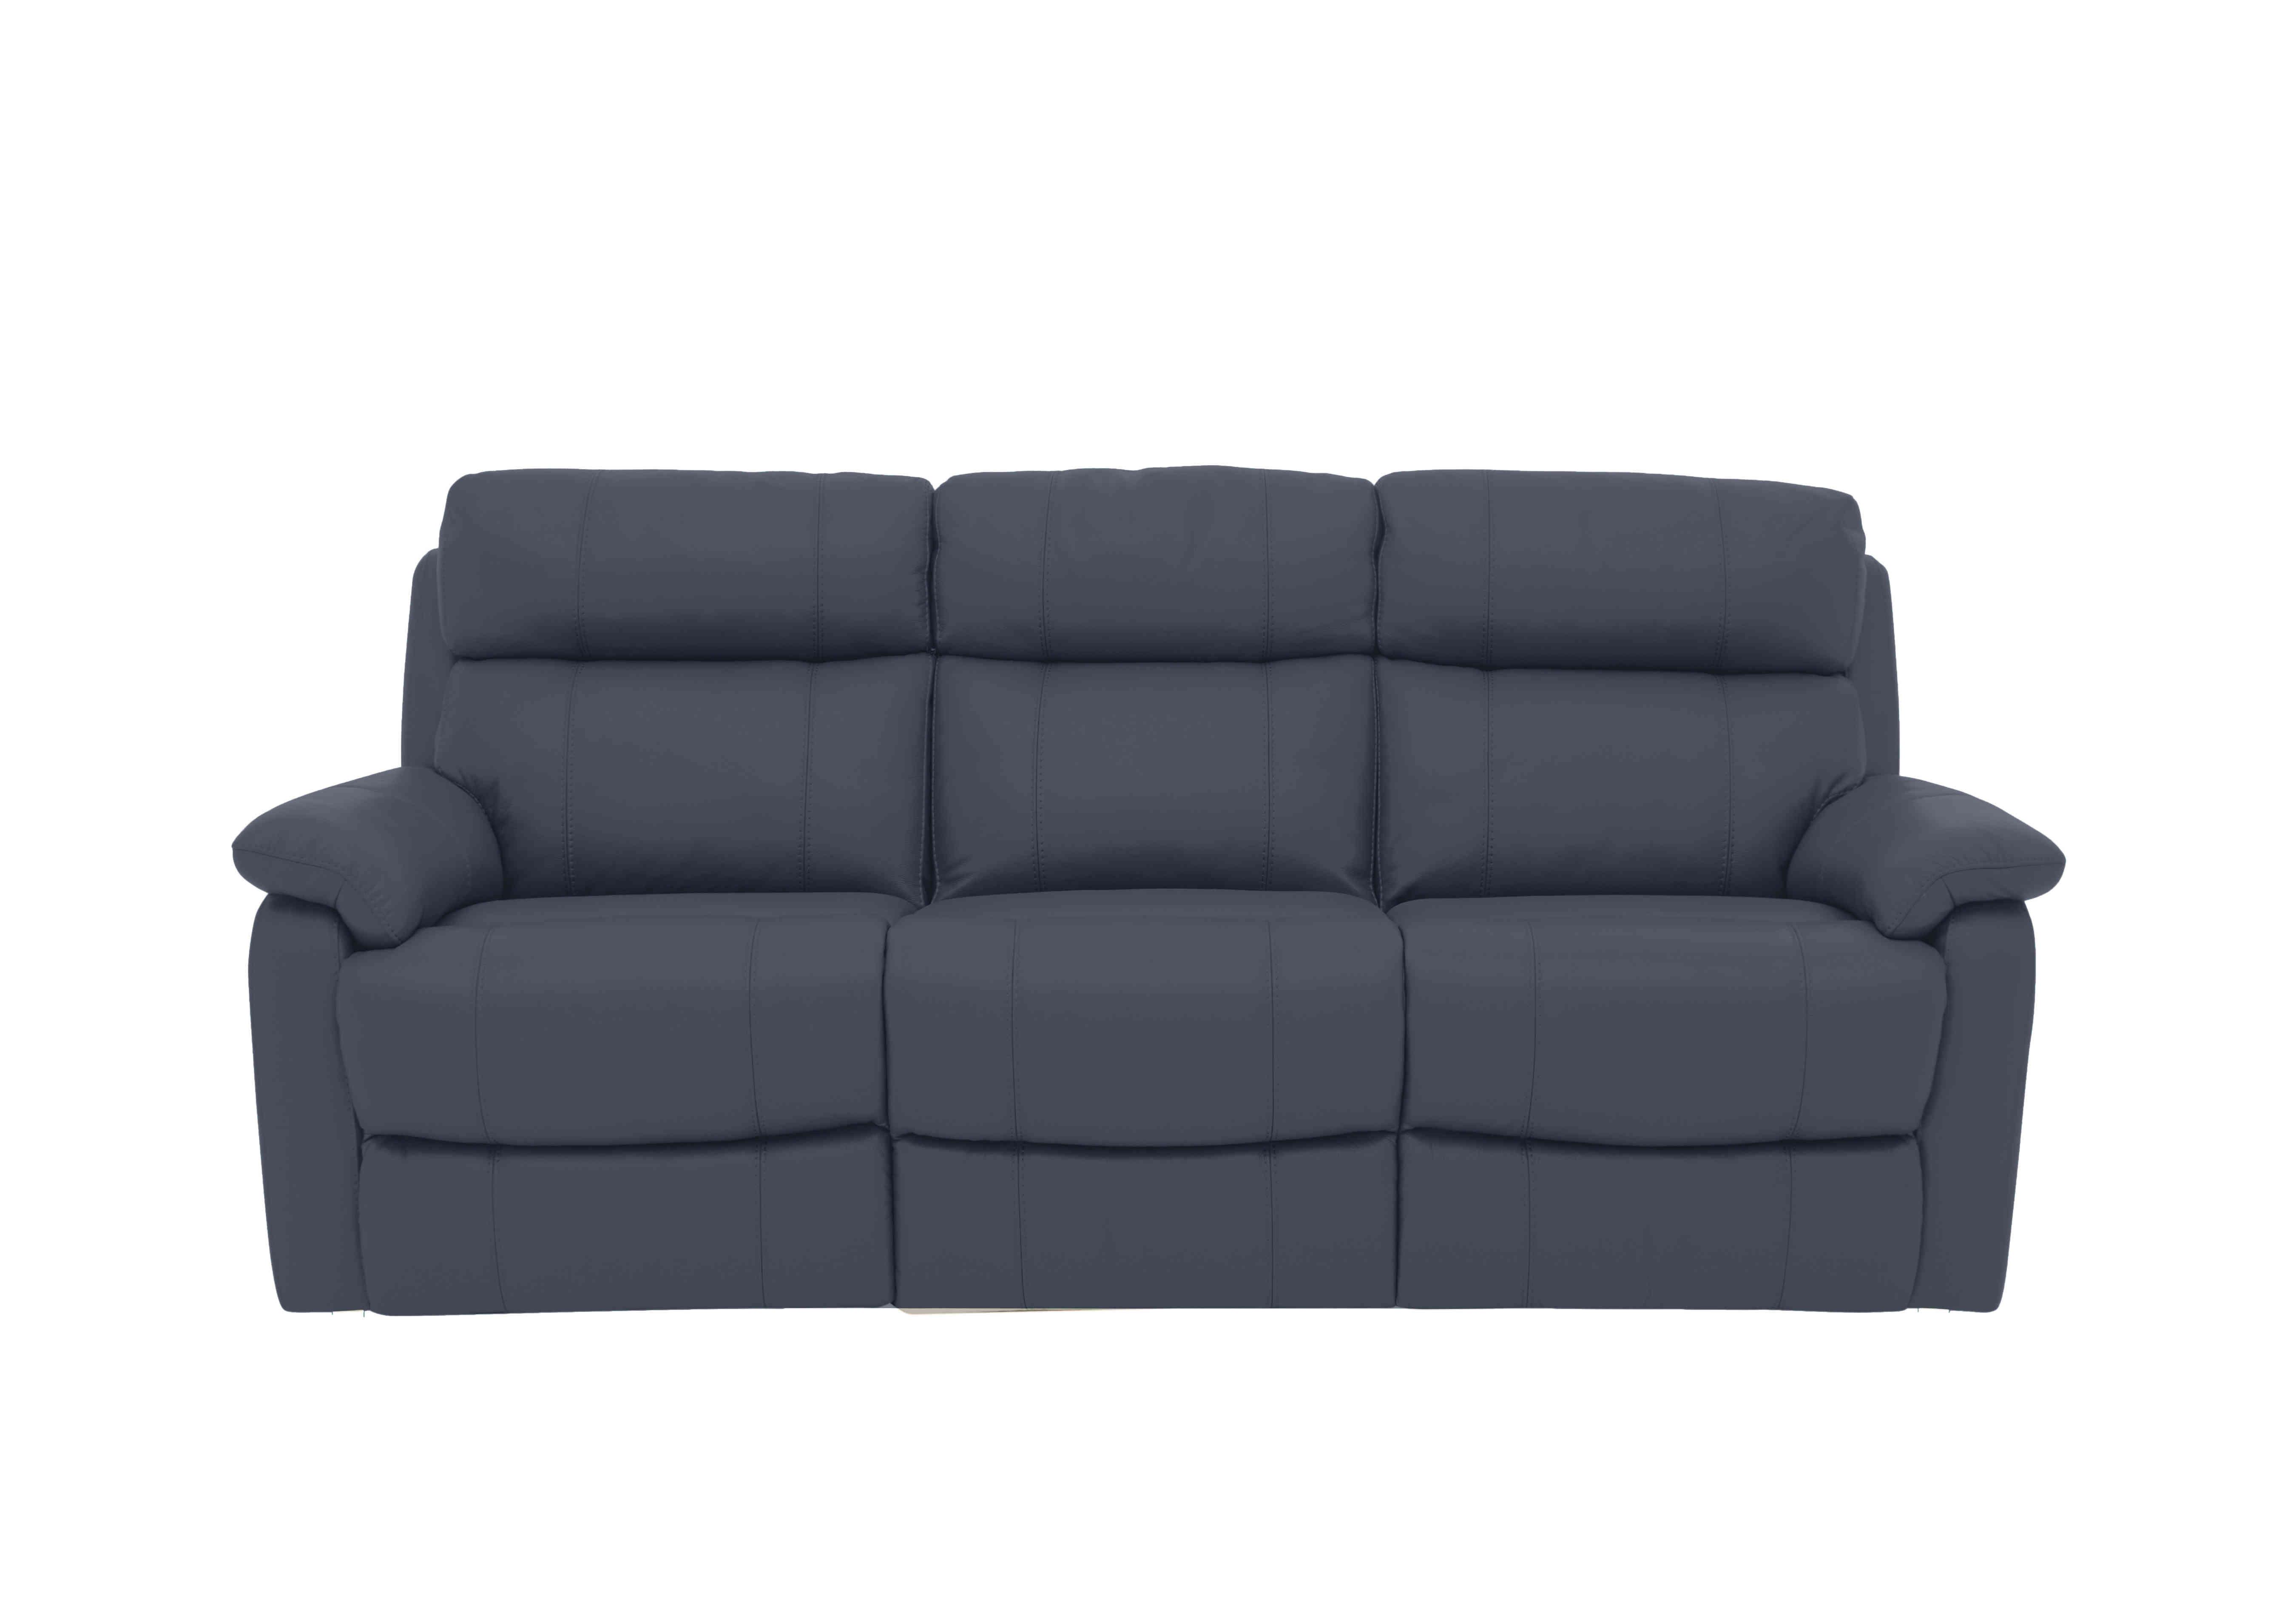 Relax Station Komodo 3 Seater Power Leather Sofa in Bv-313e Ocean Blue on Furniture Village